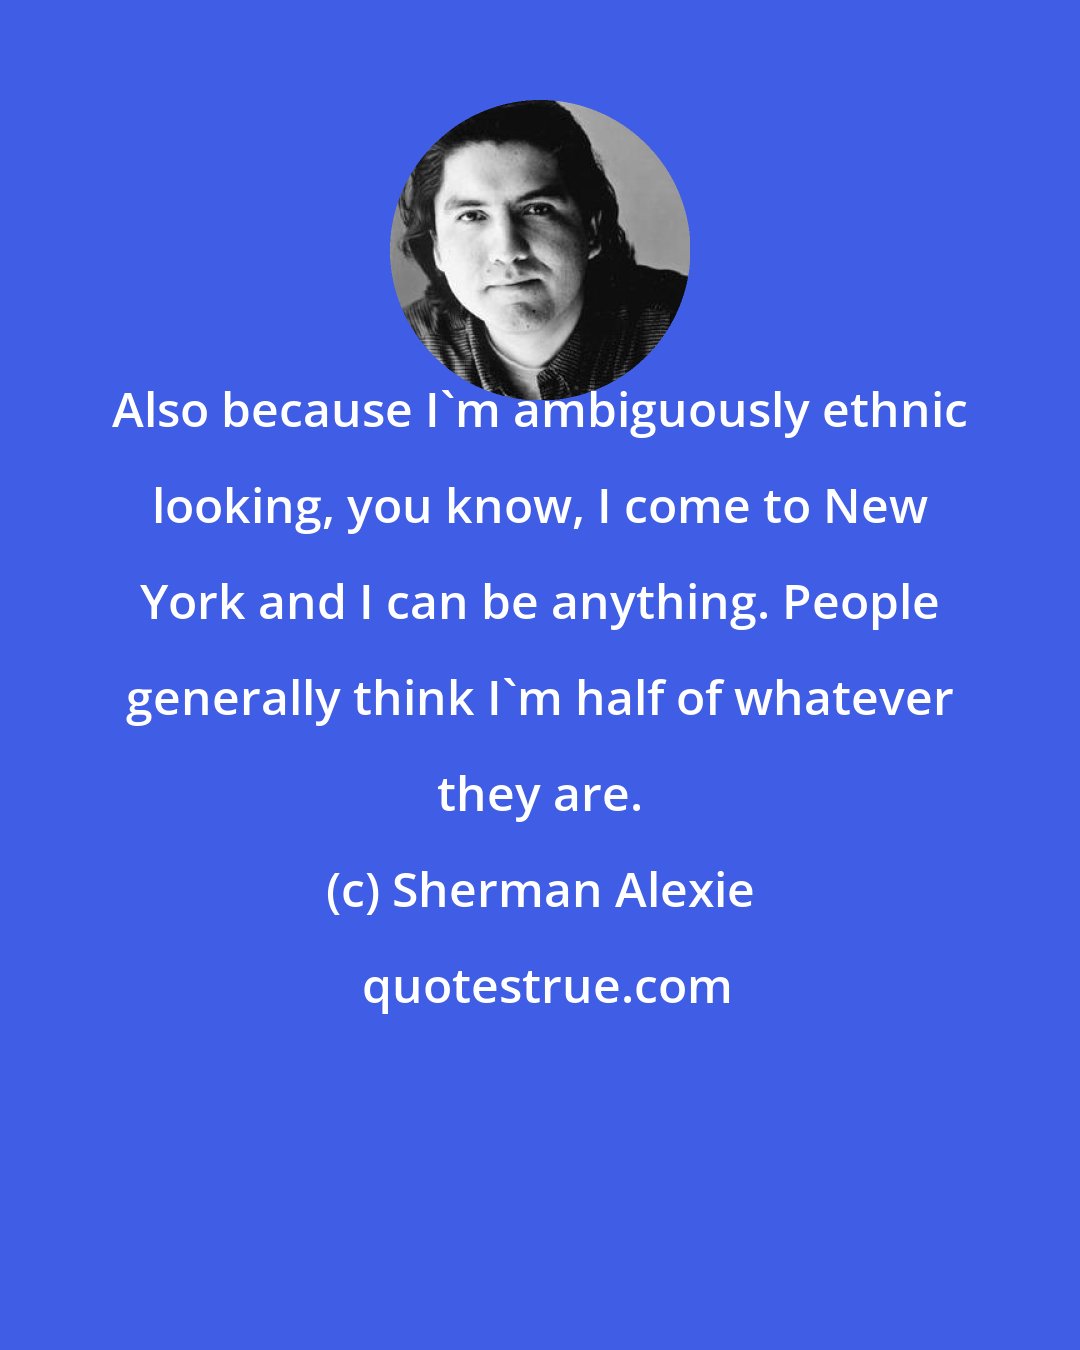 Sherman Alexie: Also because I'm ambiguously ethnic looking, you know, I come to New York and I can be anything. People generally think I'm half of whatever they are.